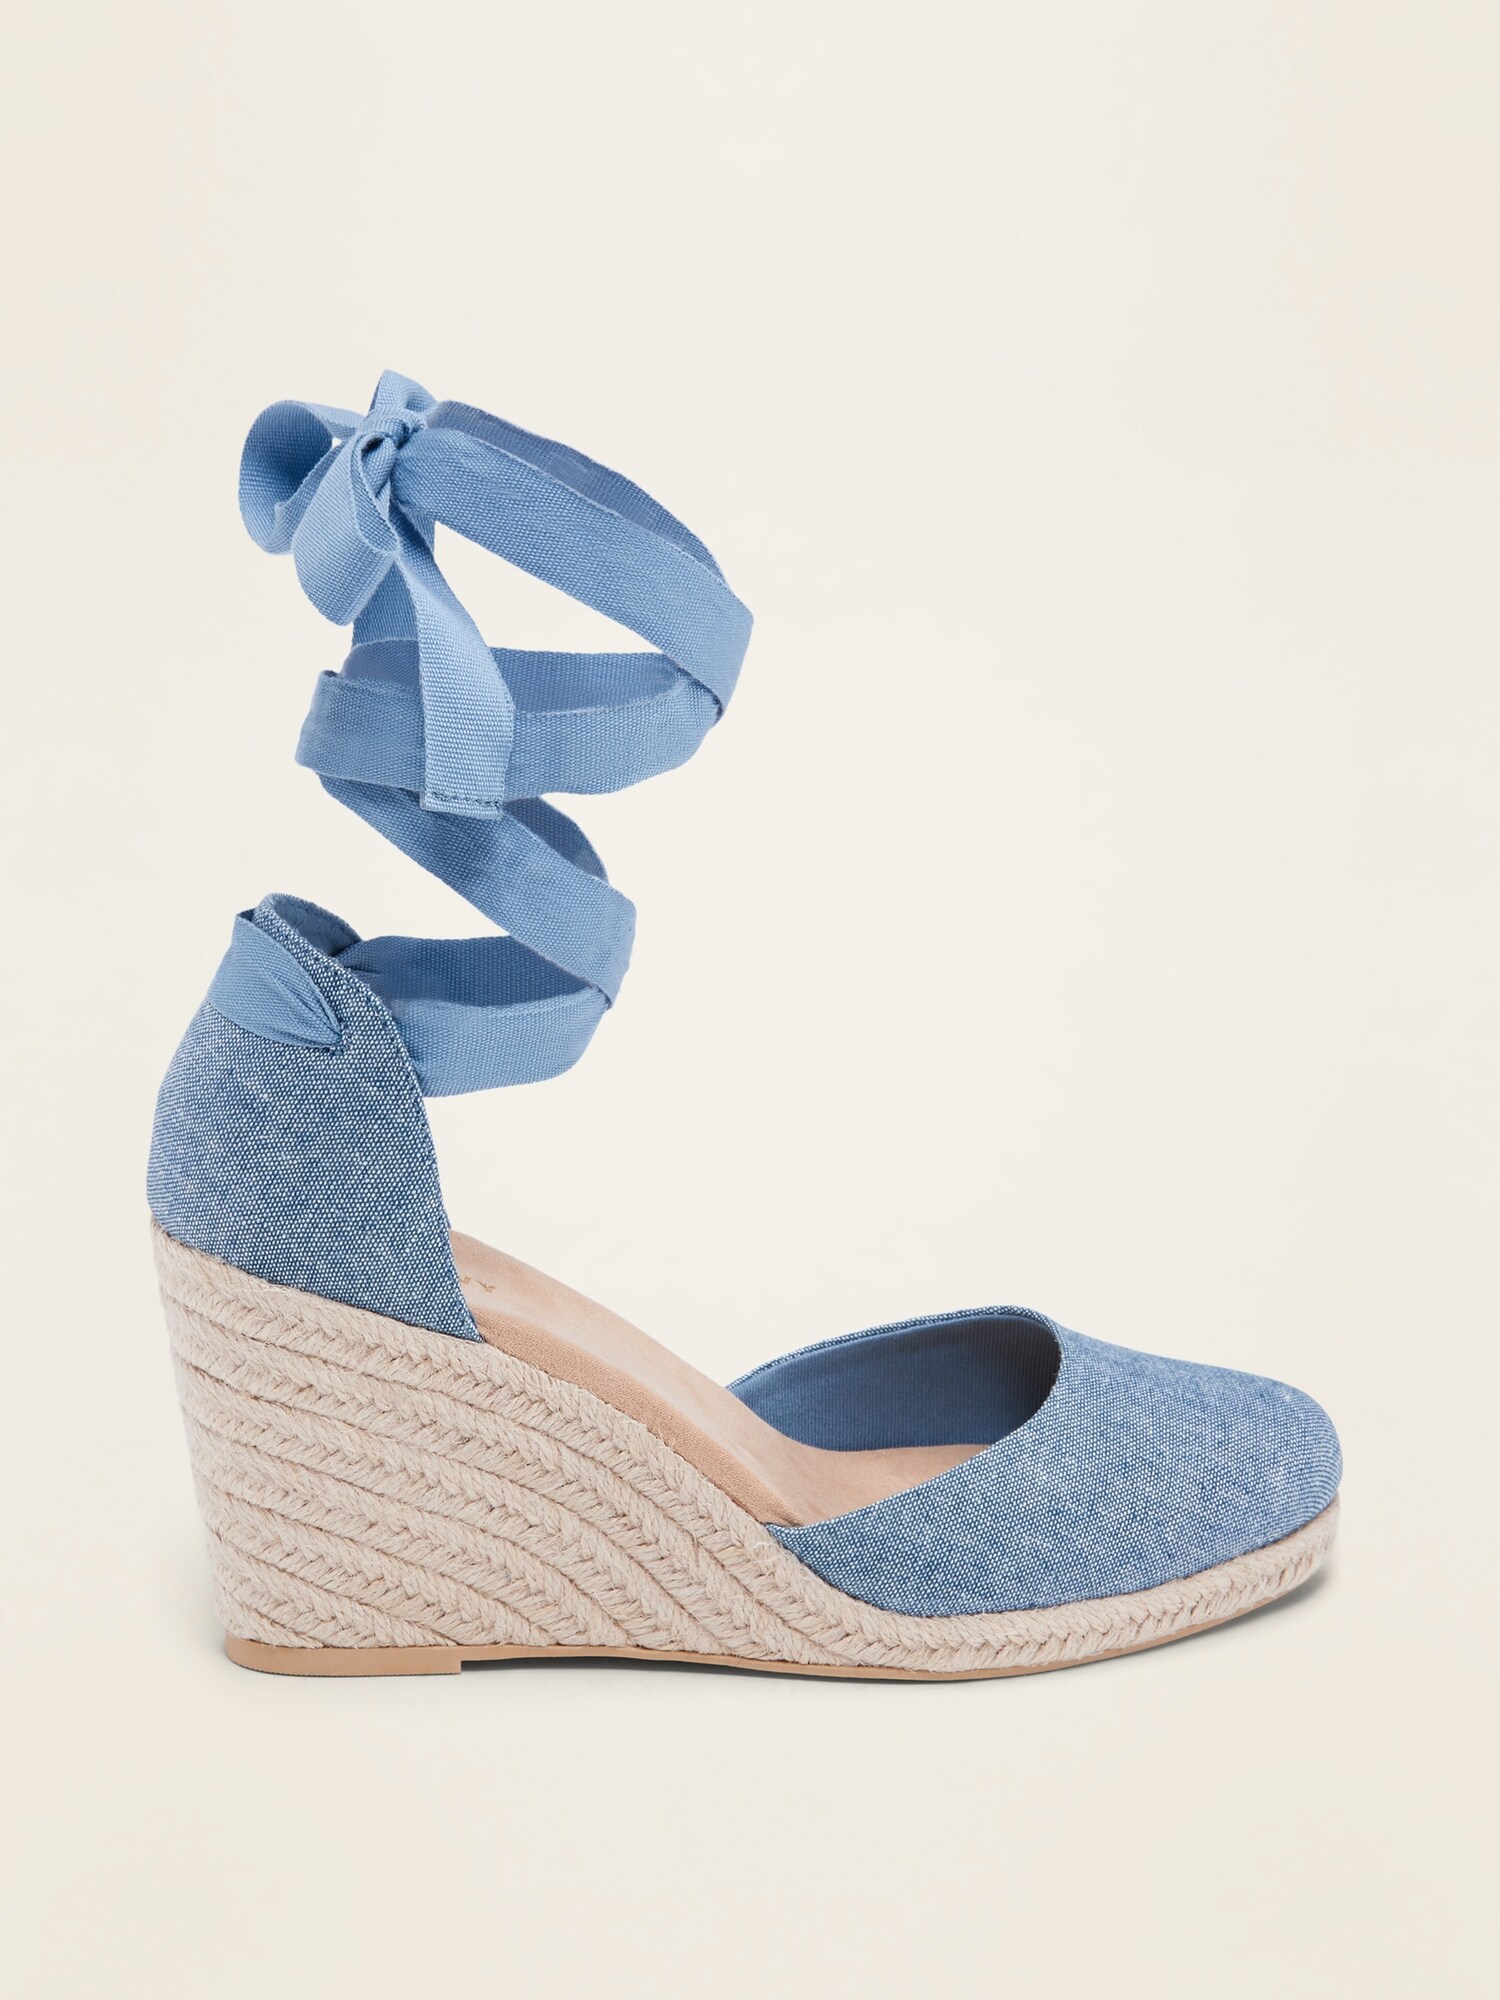 lace wedge shoes